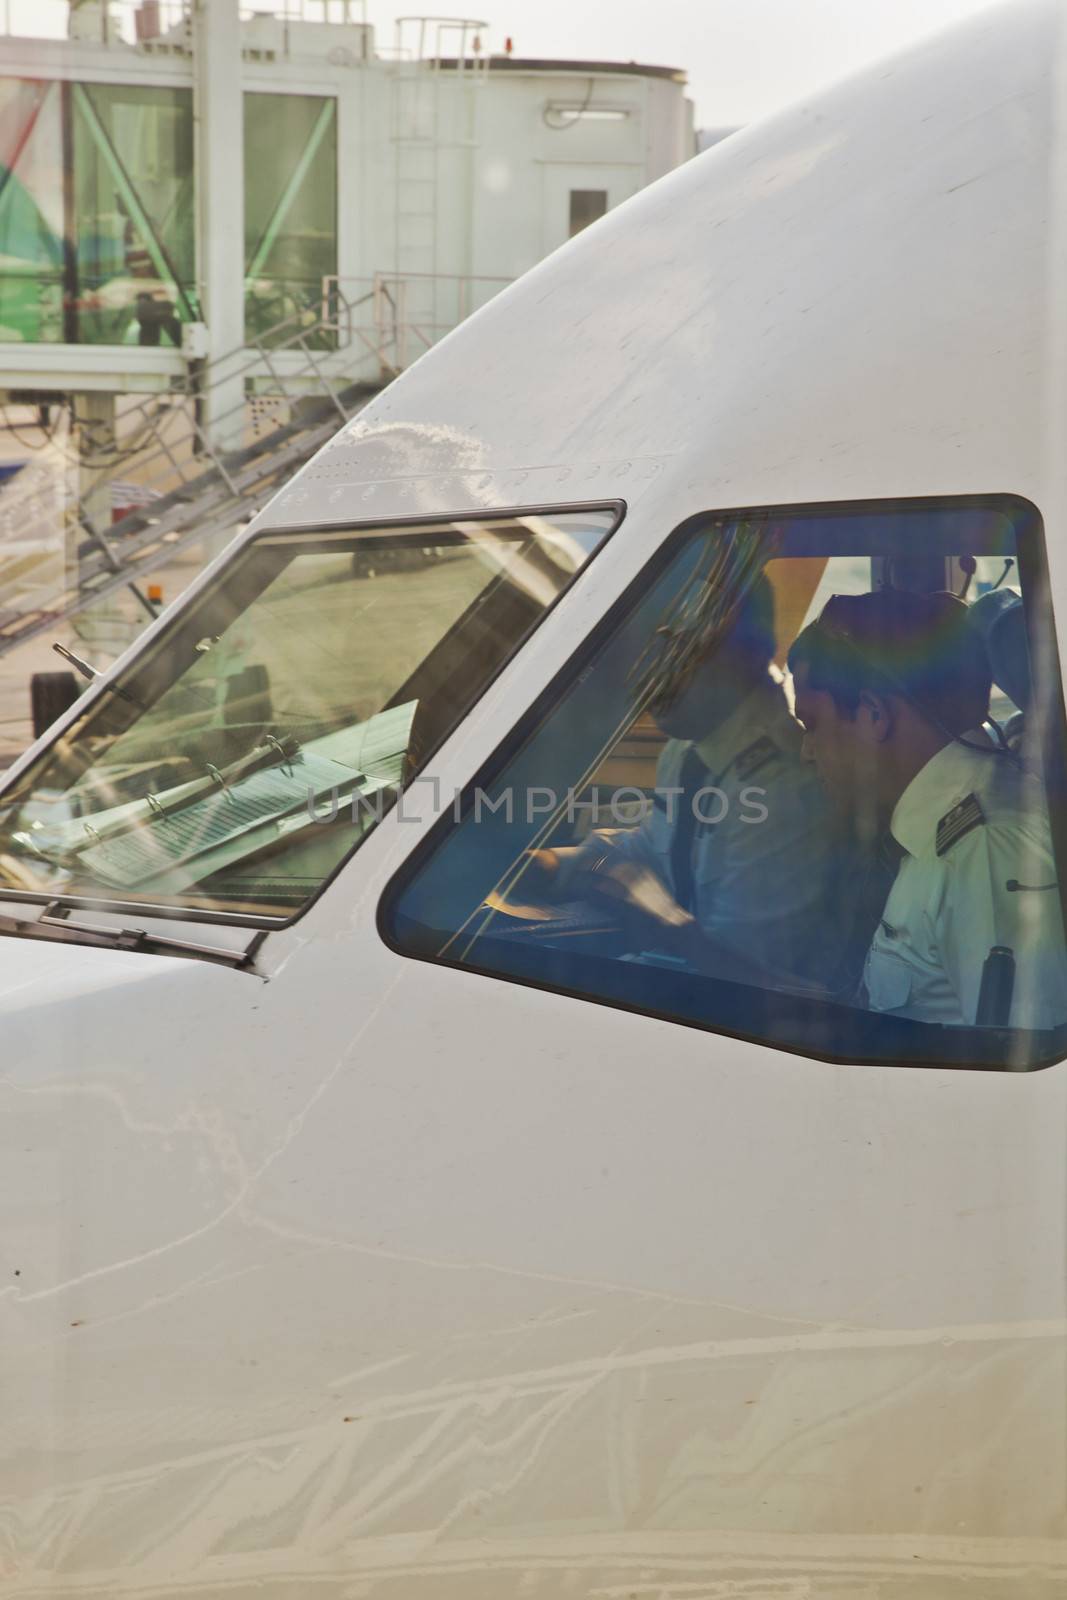 Captain and co-pilot make routine pre-flight checks on a commercial airline before take-off on an internal flight in Chennai, India